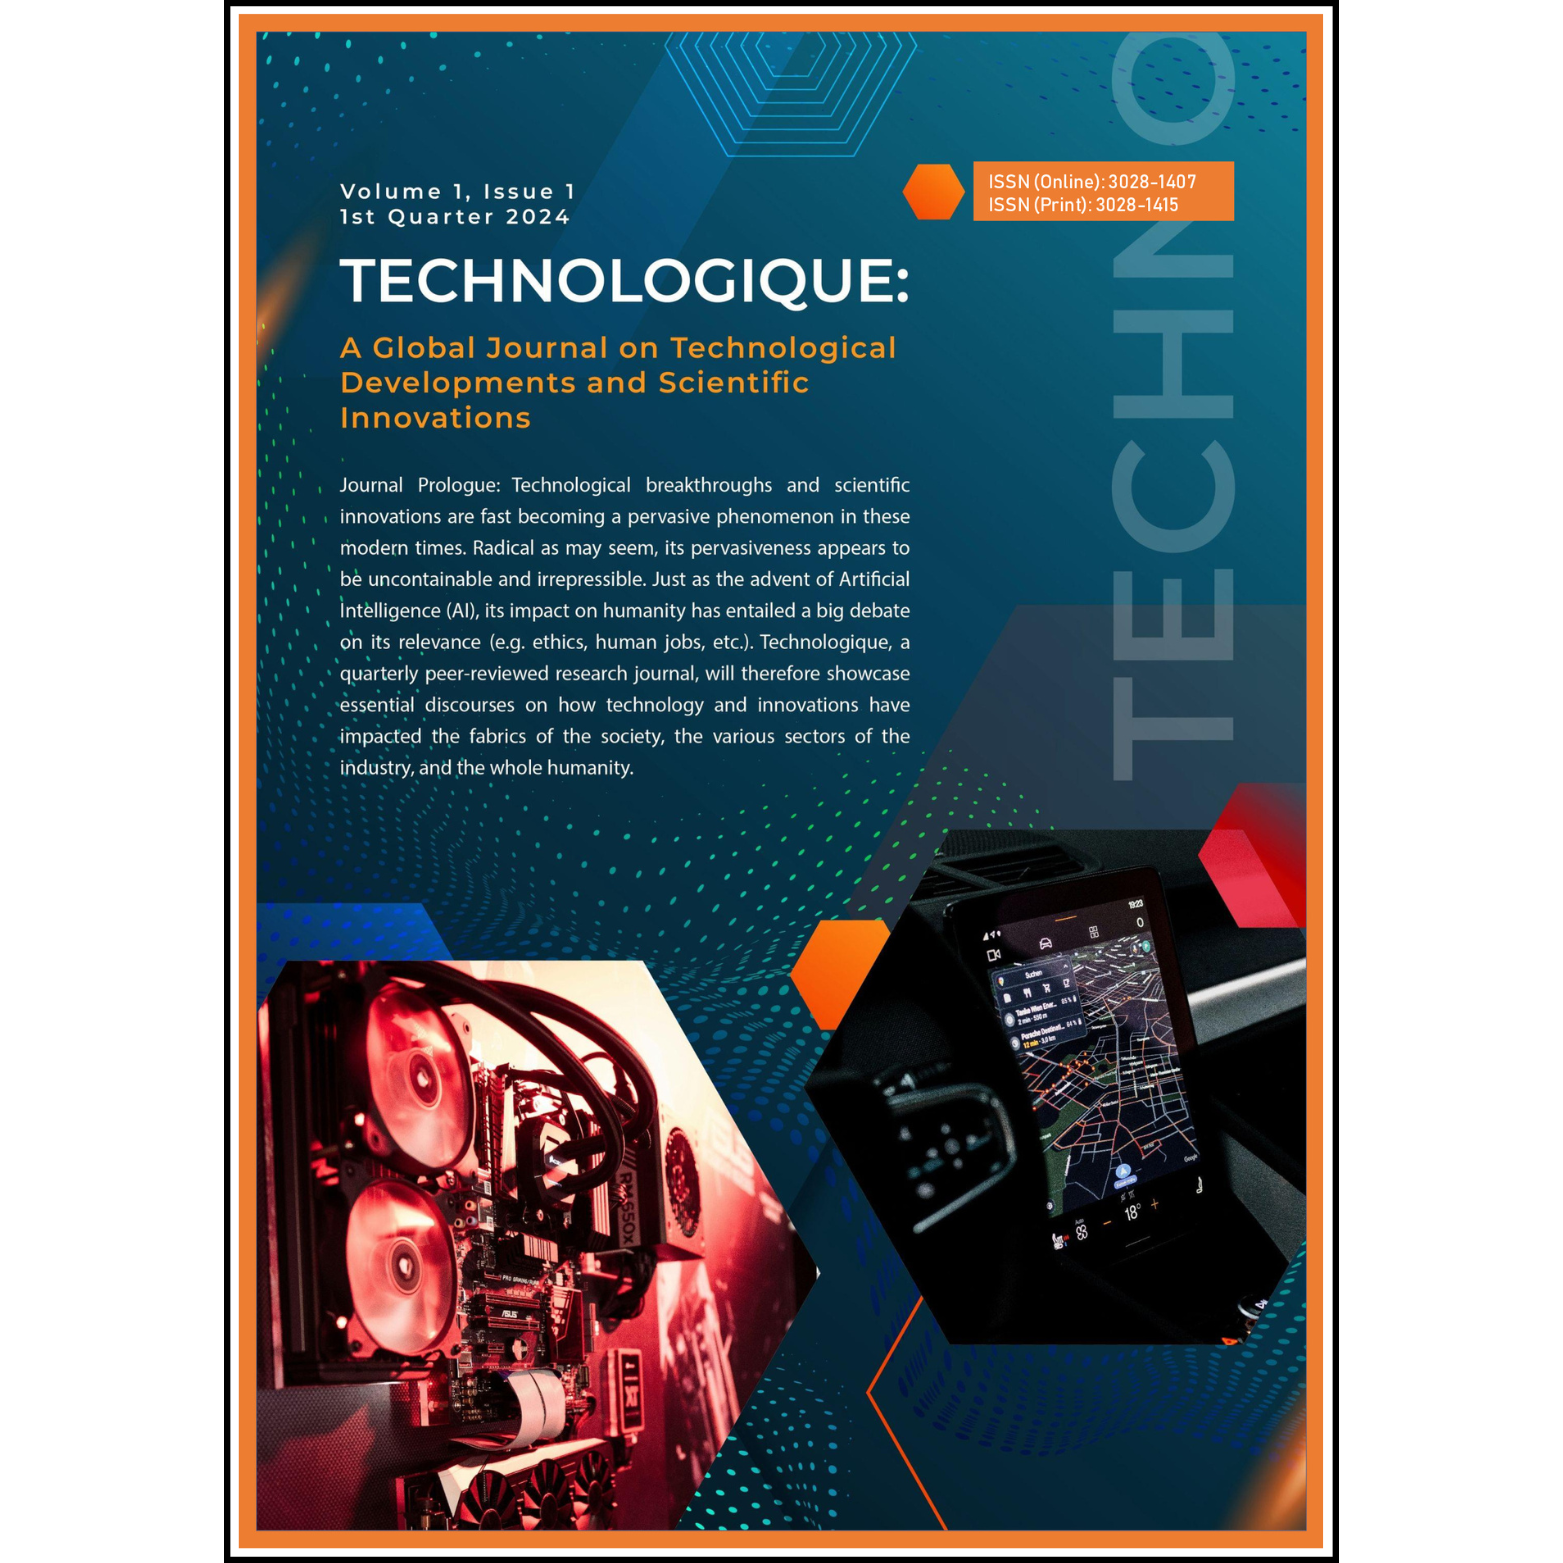 Technologique: A Global Journal on Technological Developments and Scientific Innovations